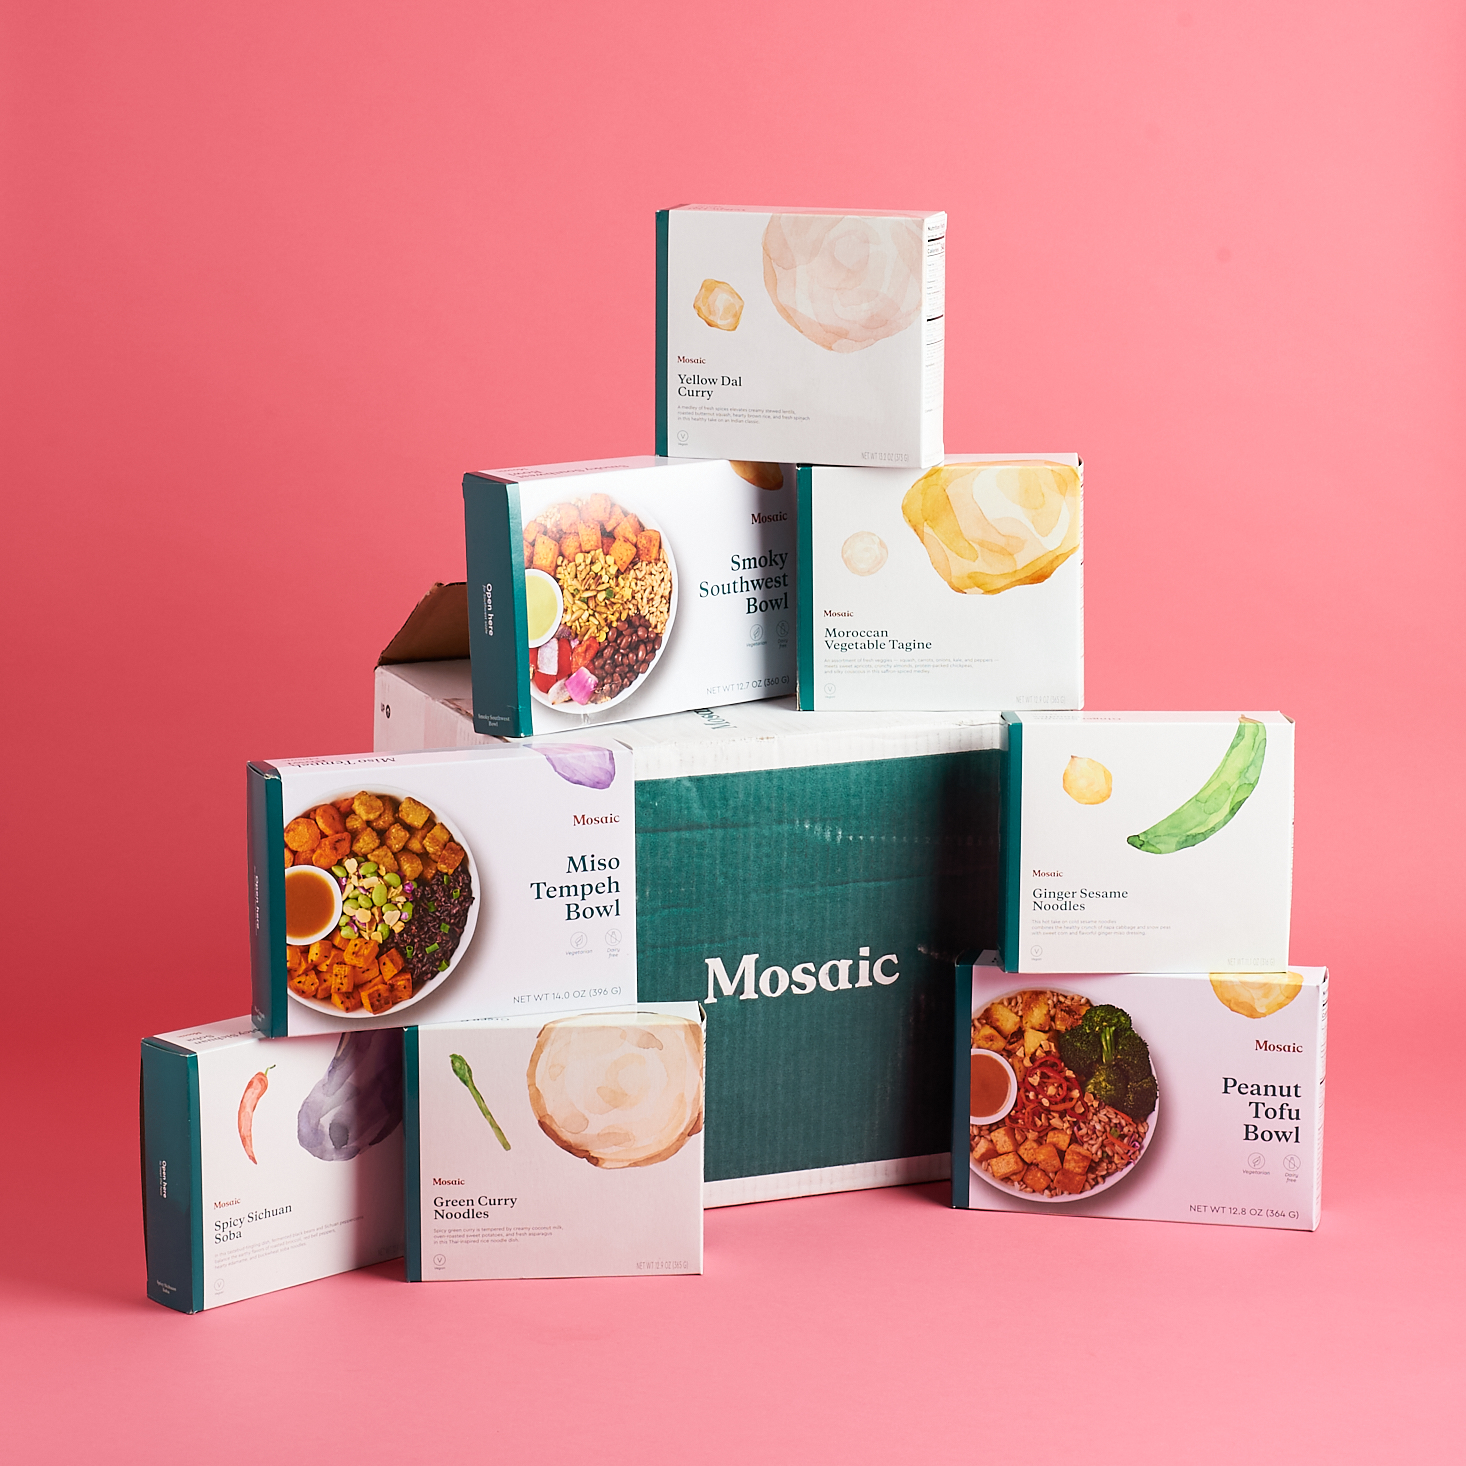 Mosaic Review – Plant-Based and Flavor-Packed Frozen Meals